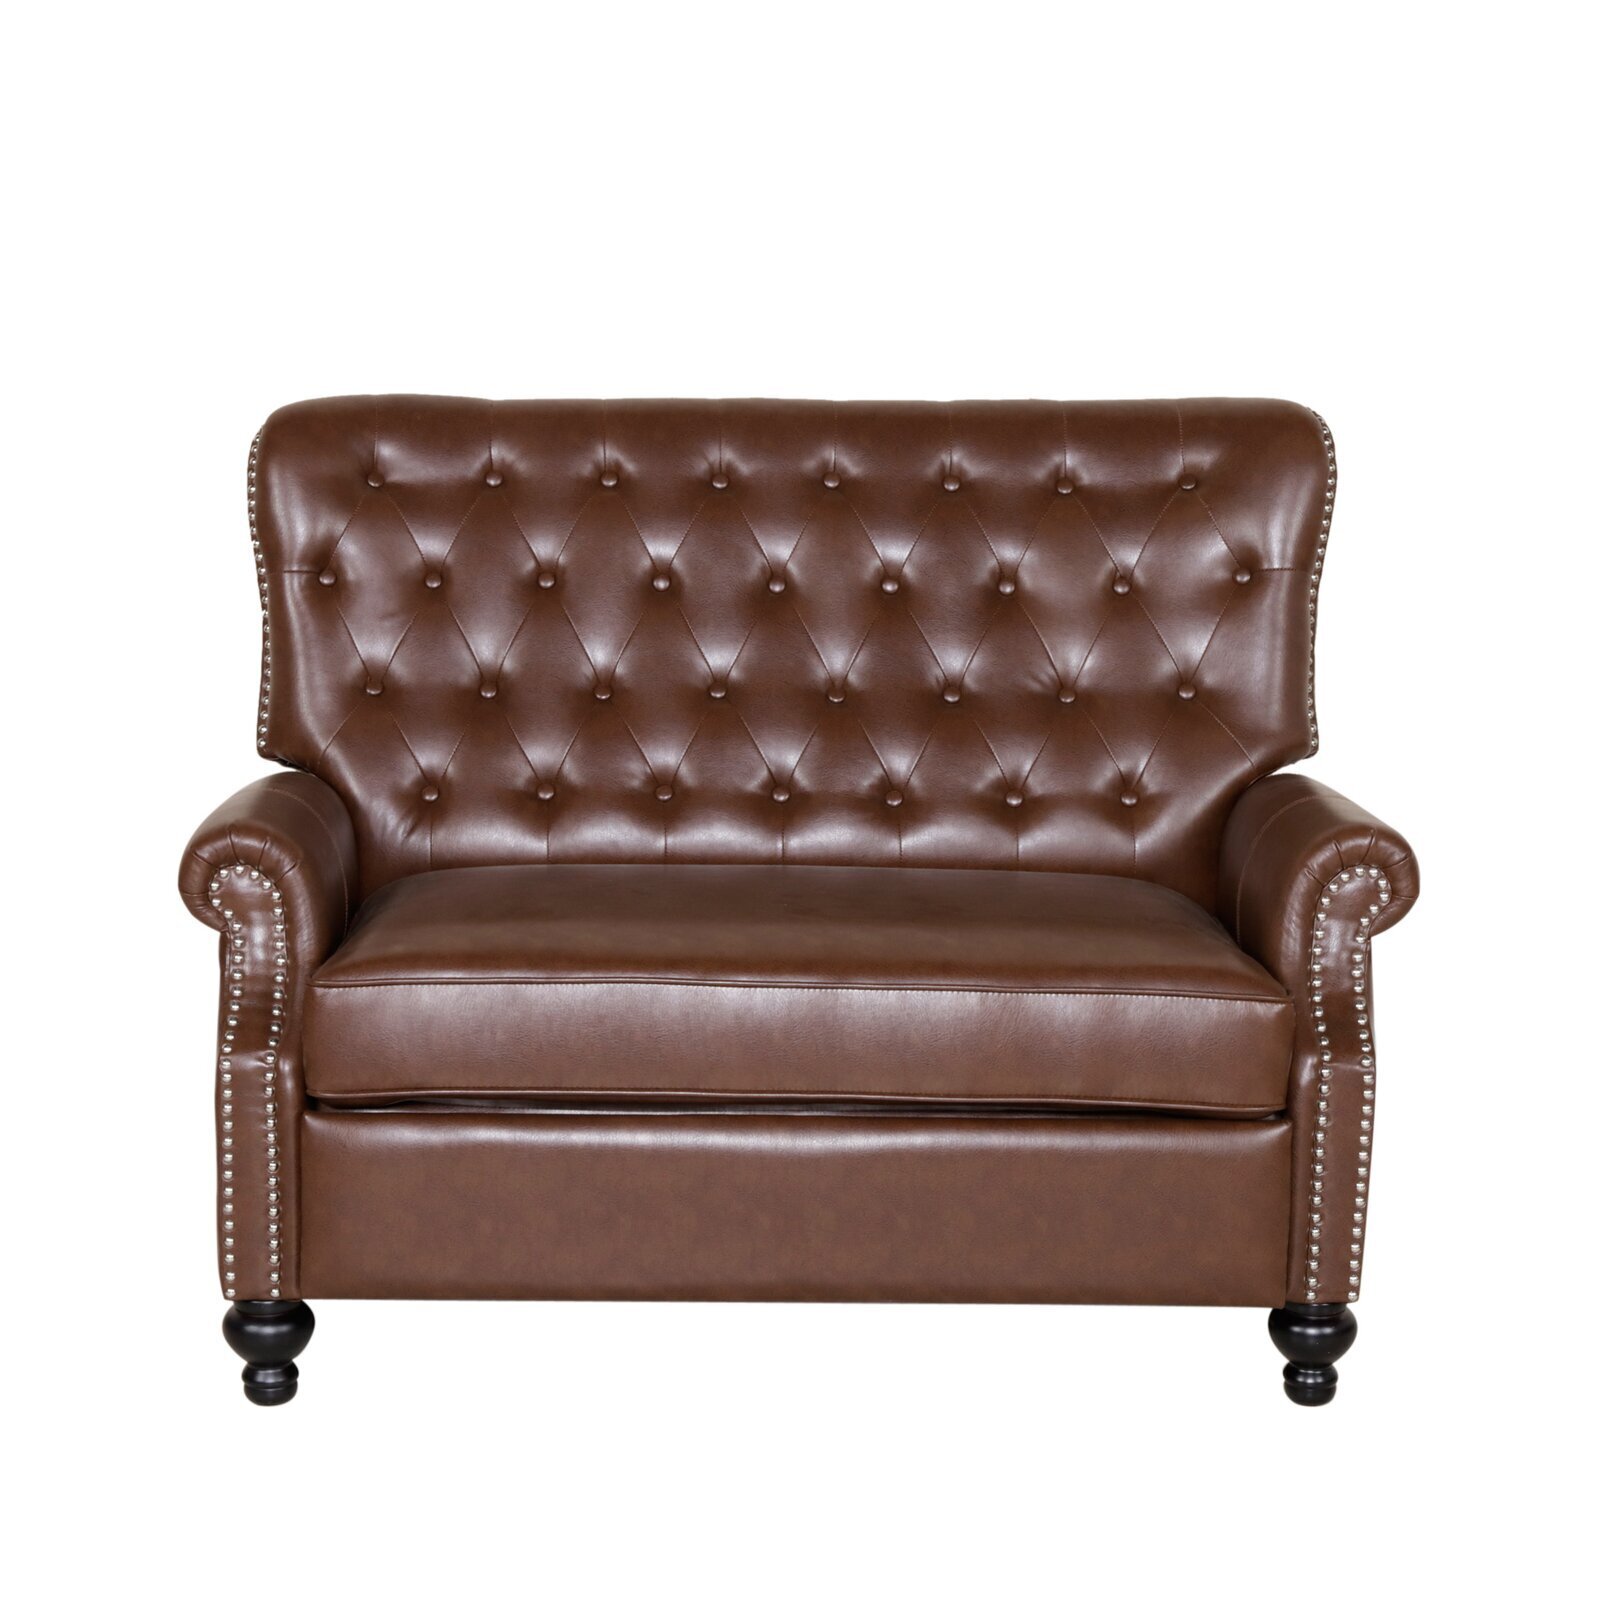 Classic Faux Leather Oversize Recliner